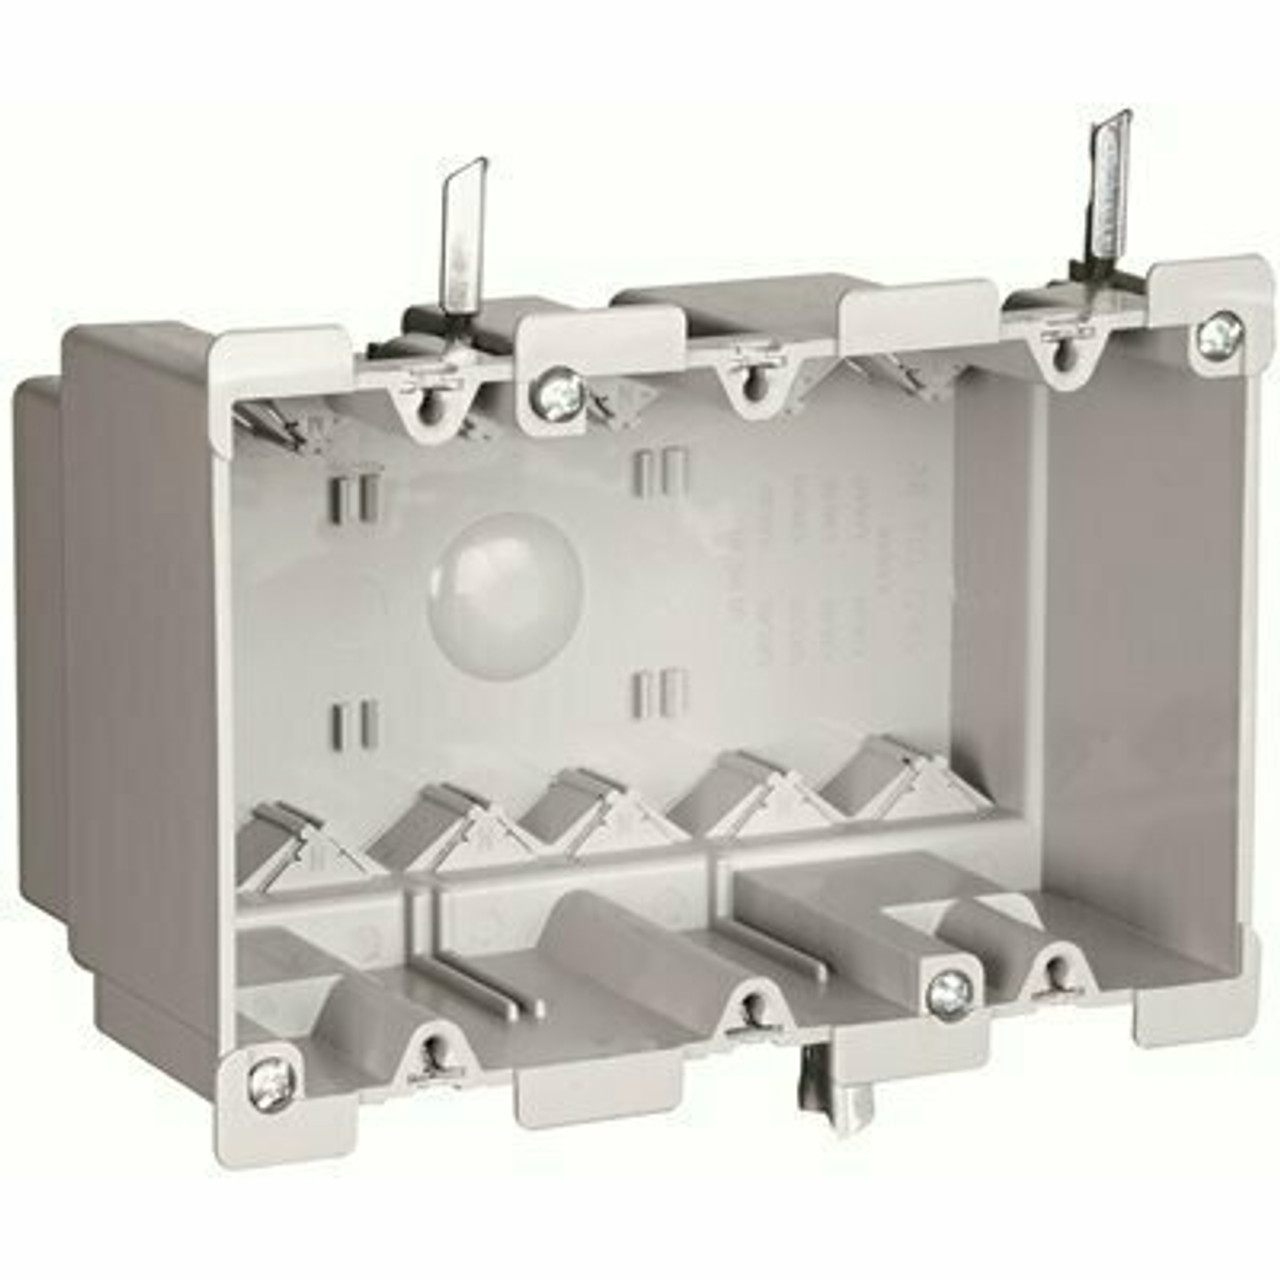 Legrand Pass & Seymour Slater Old Work Plastic 3 Gang Swing Bracket Switch And Outlet Box With Quick/Click